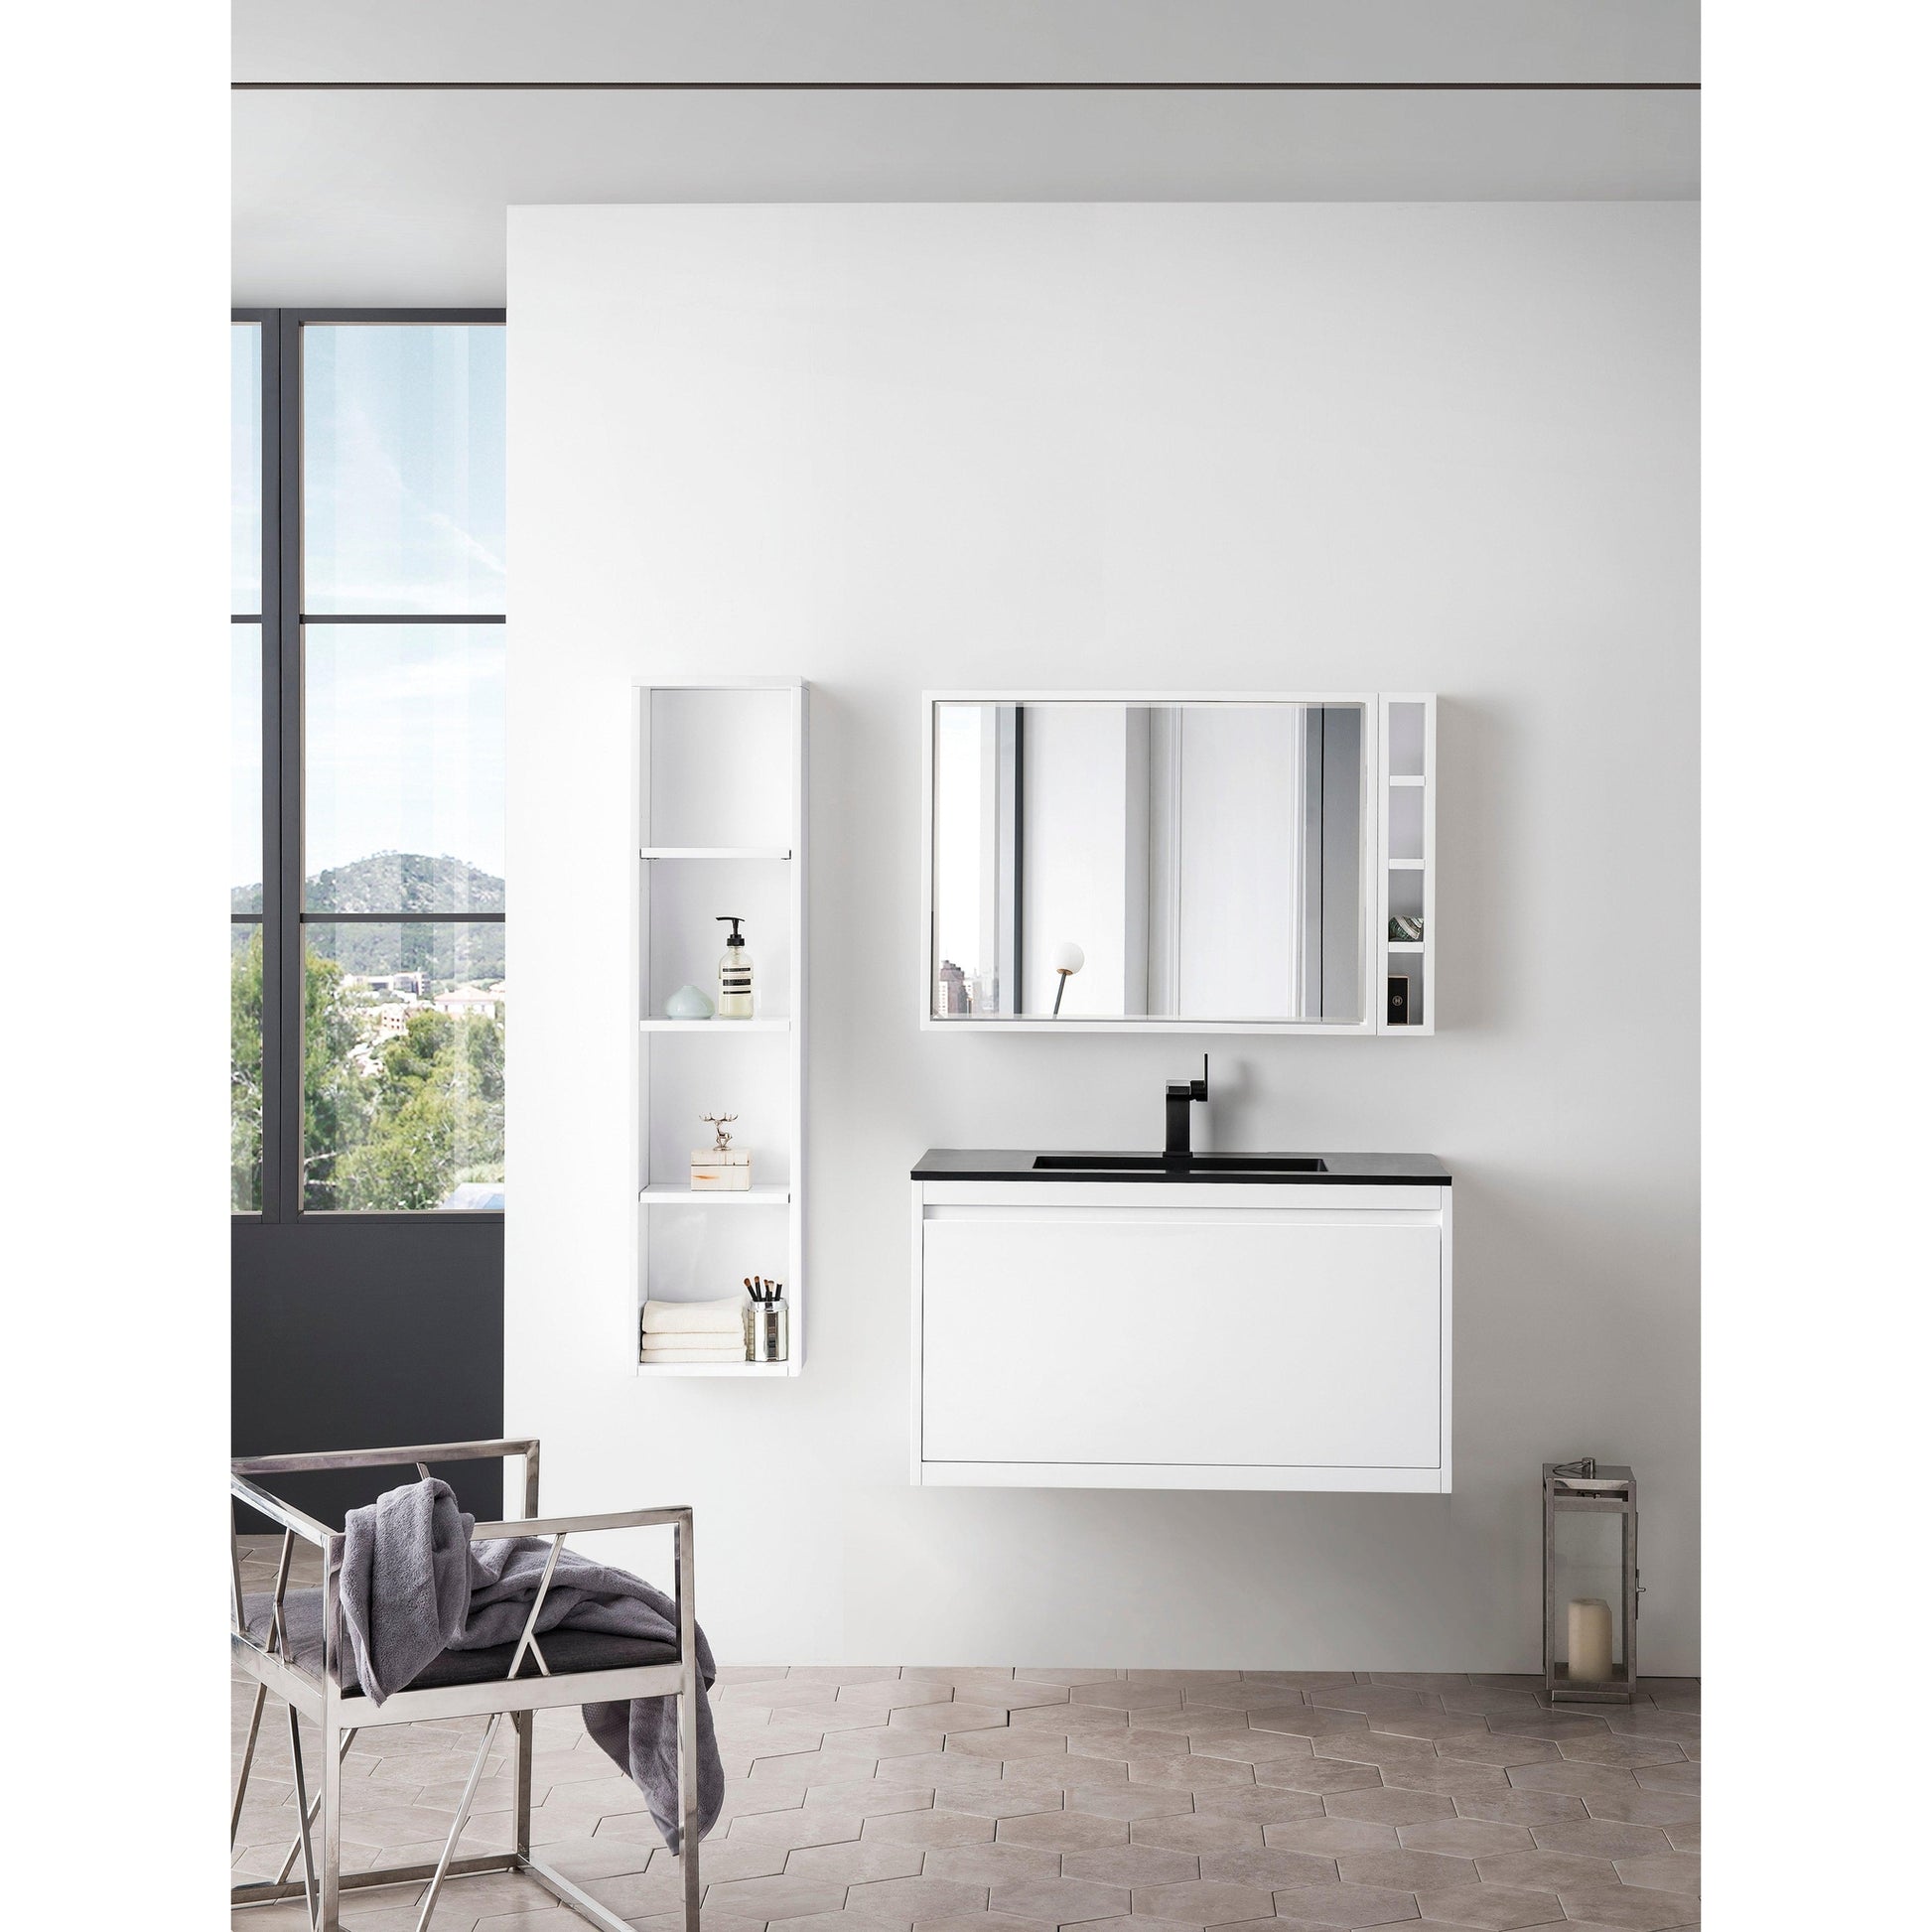 James Martin Vanities Milan 35.4" Glossy White Single Vanity Cabinet With Charcoal Black Composite Top